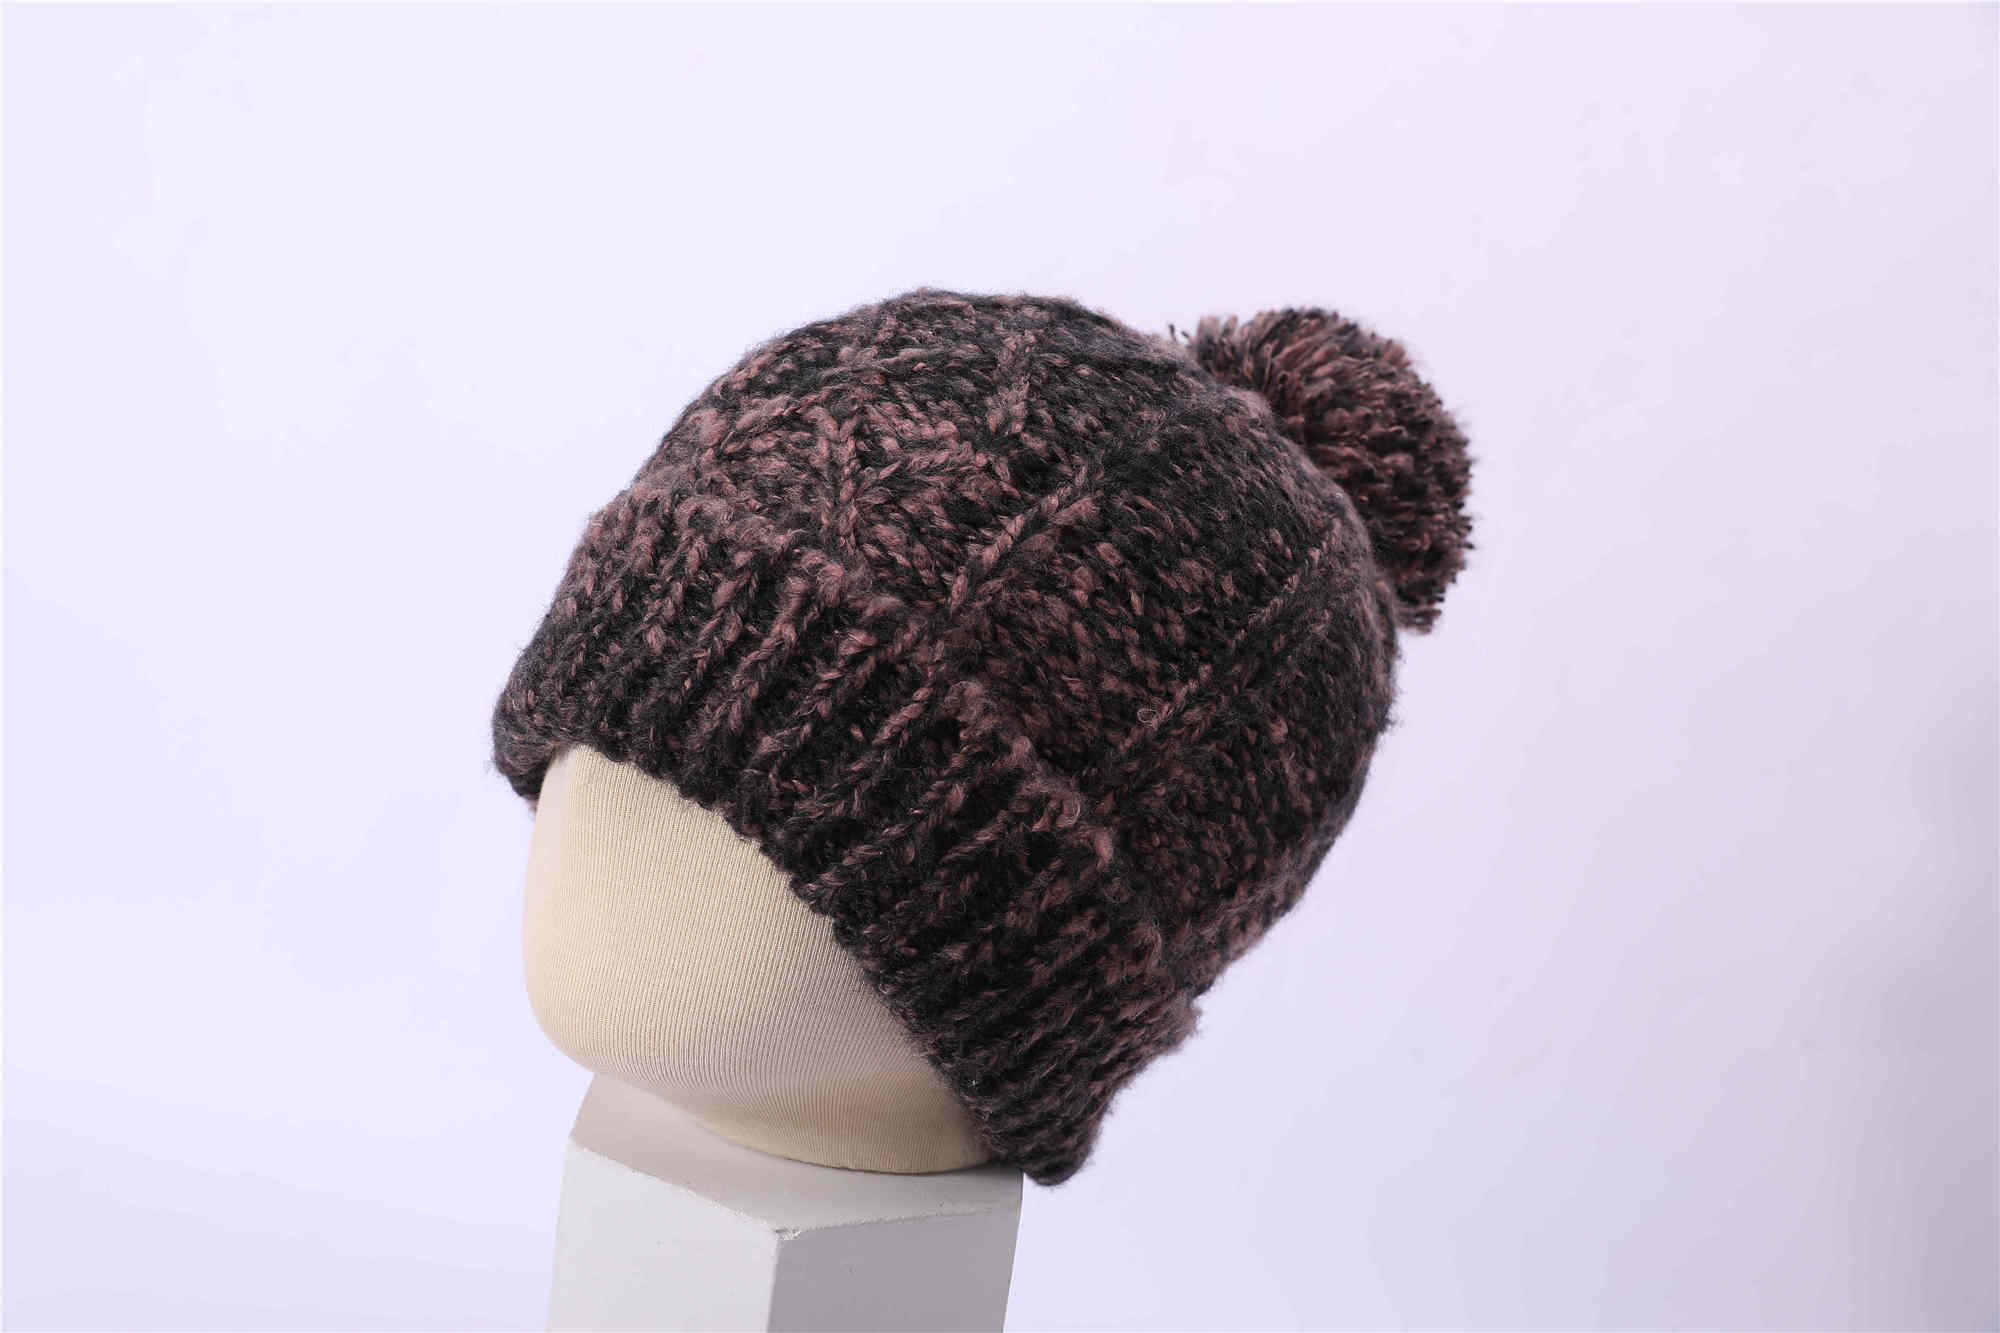 carhartt knit hat for ladies